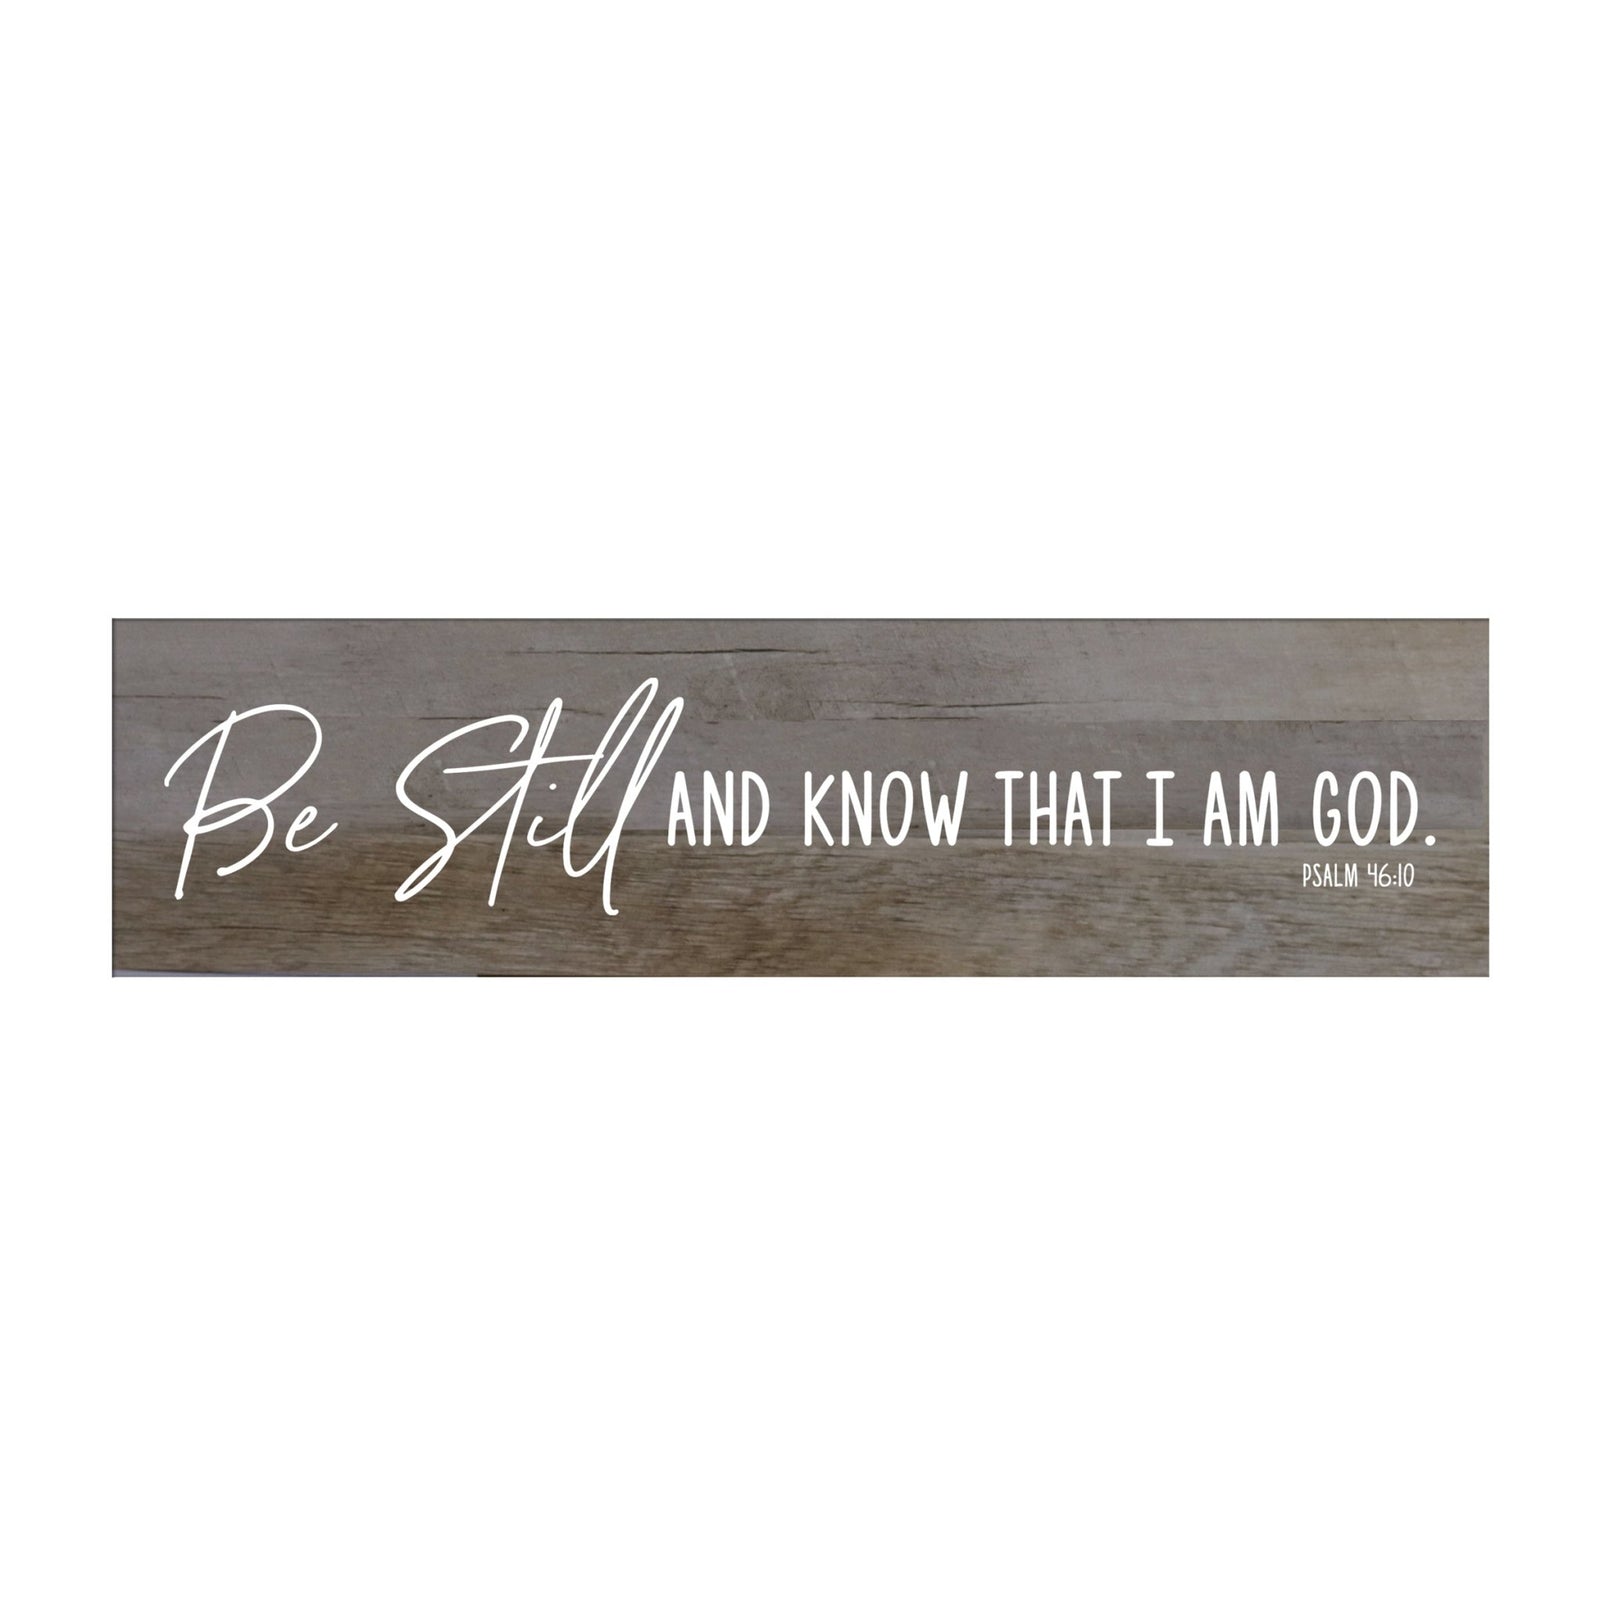 Inspirational Everyday Home and Family Wooden Wall Art Hanging Plaque 10 x 40 – Be Still And Known - LifeSong Milestones